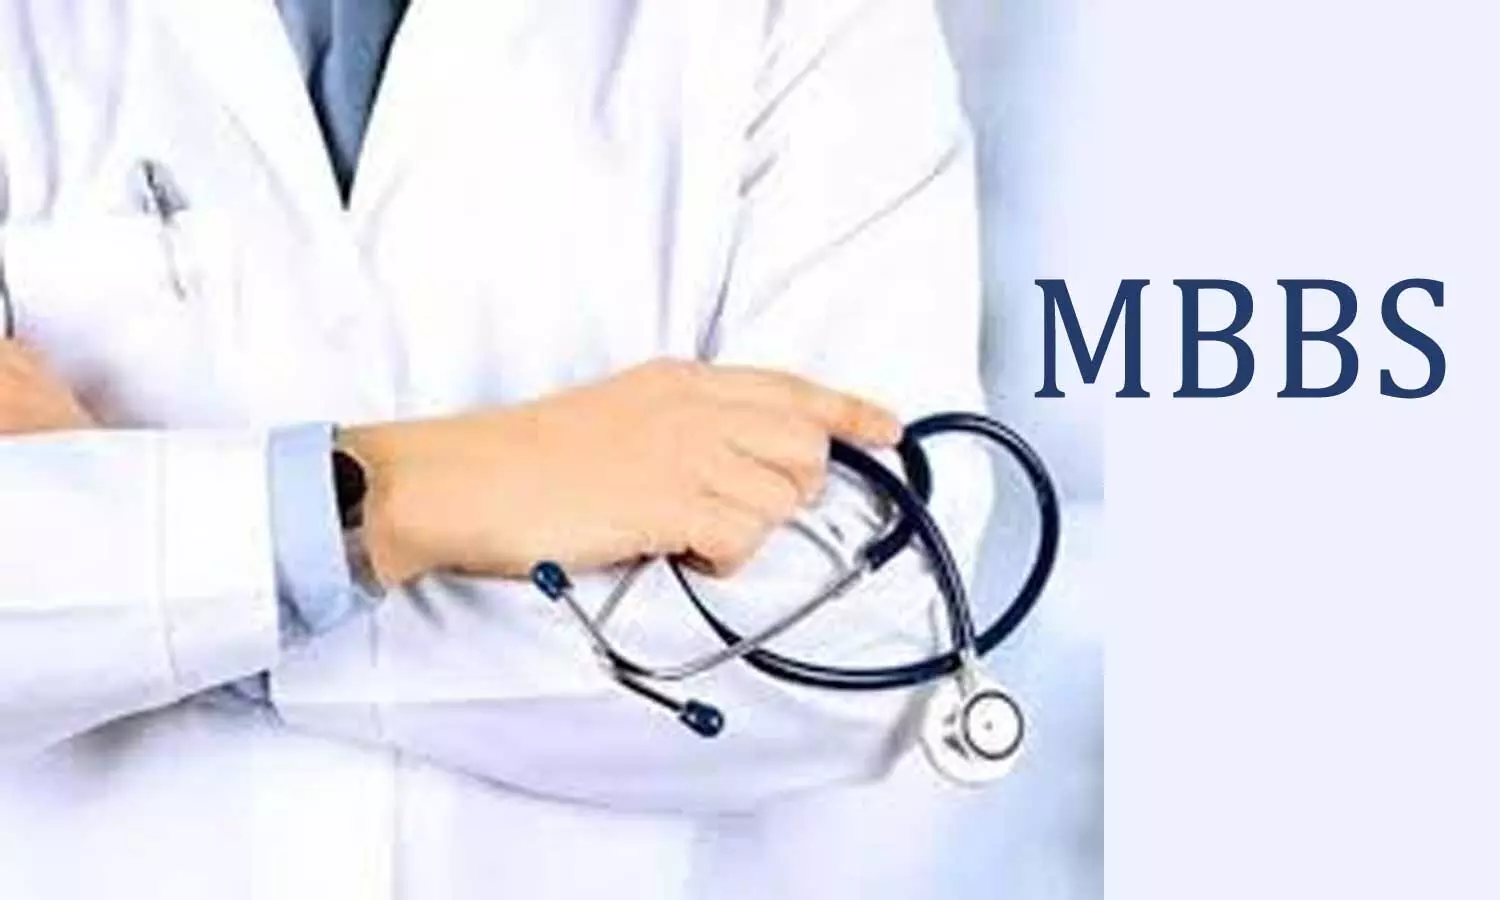 4,150 MBBS seats available at Private Medical Colleges in Uttar Pradesh